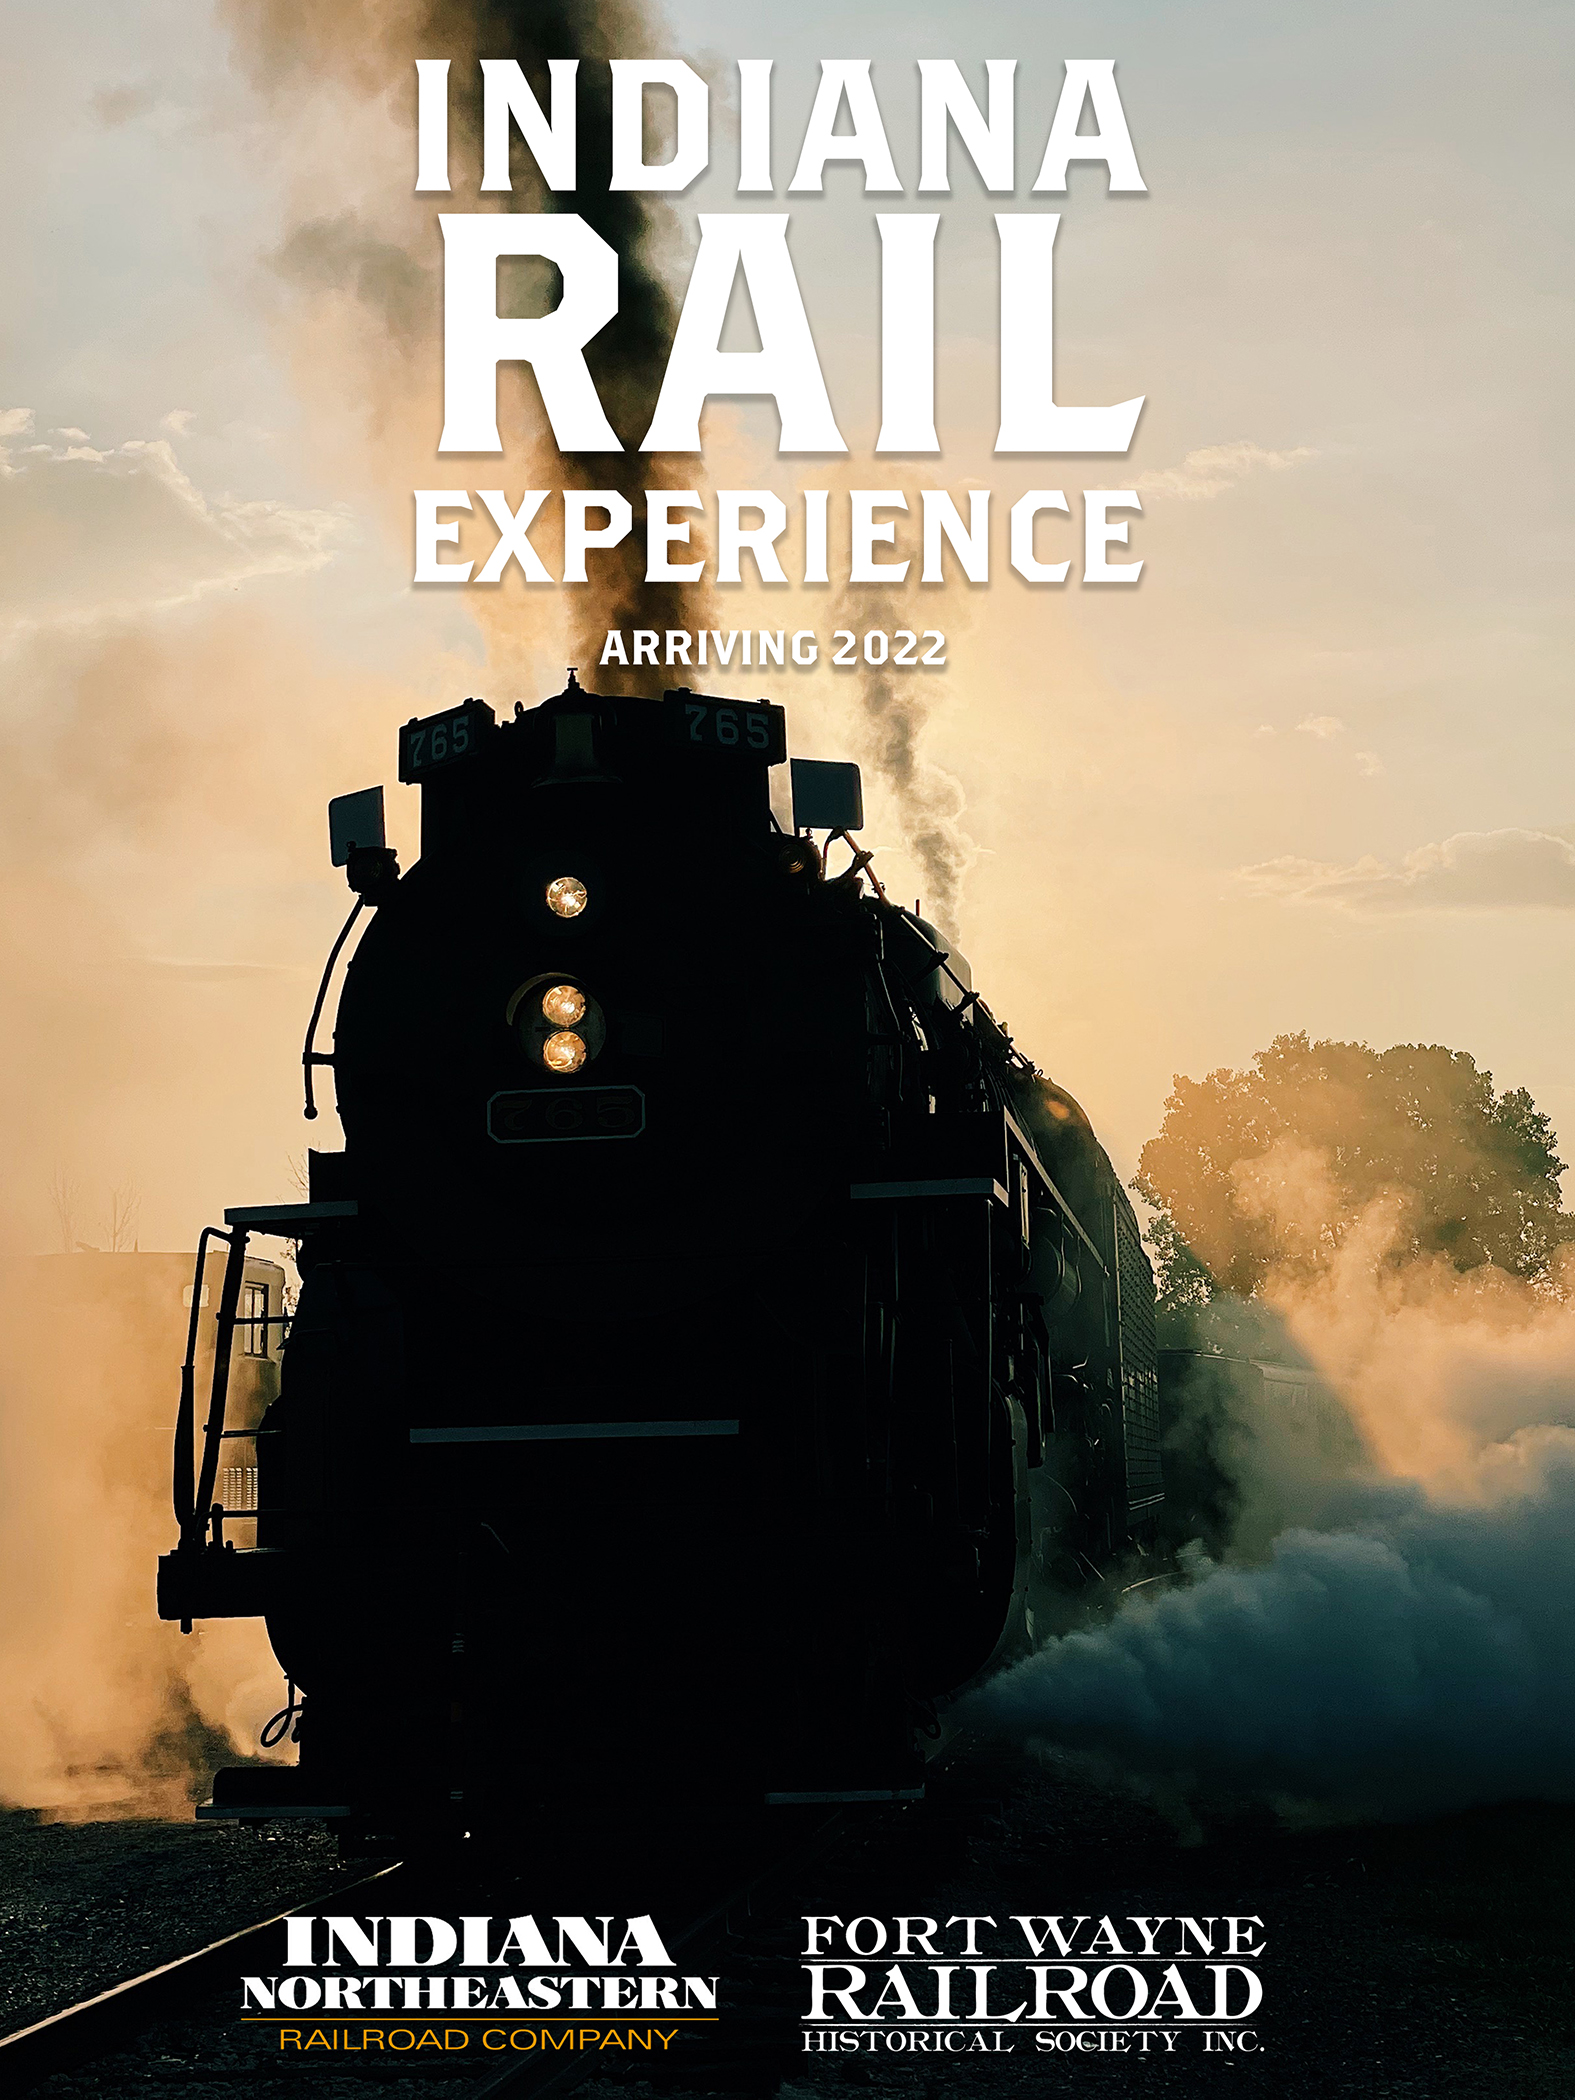 Introducing the Indiana Rail Experience Indiana Rail Experience